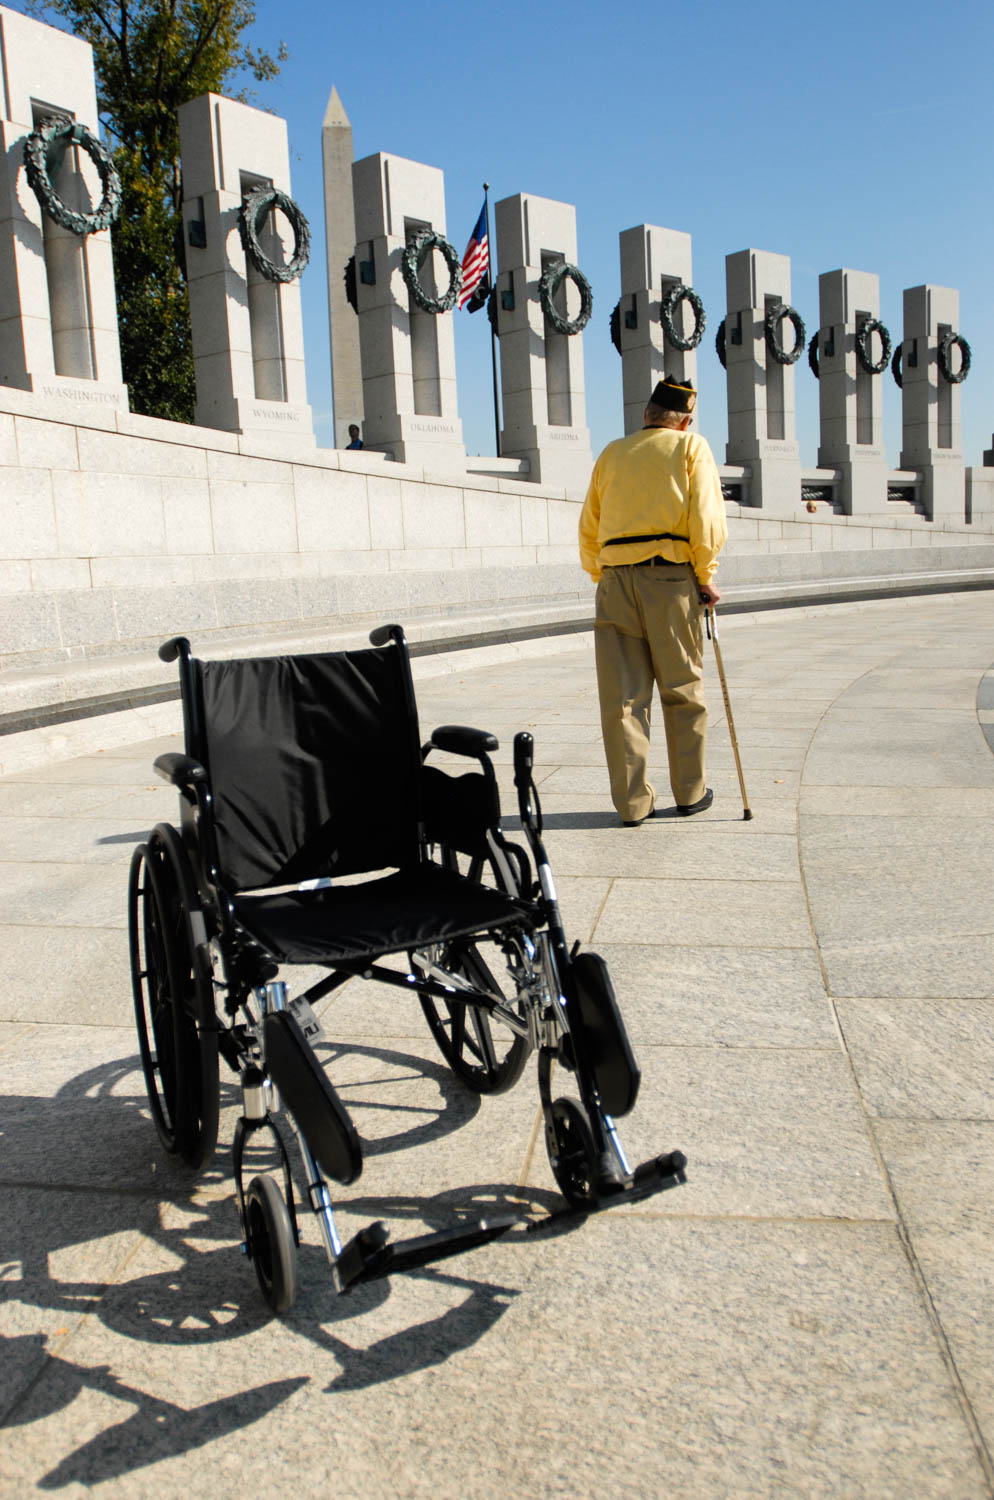 World War II veteran Joe Colmer, of East Moline, leaves his wheelchair behind as he takes a moment to himself while visiting the World War II Memorial in Washington D.C. on Nov. 1, 2008.  Colmer, a veteran of D-Day and other major battles during the war, was among 96 local veterans who traveled to the nation's capital to visit the World War II Memorial as part of Honor Flight of the Quad Cities. (Todd Mizener - Dispatch/Argus)